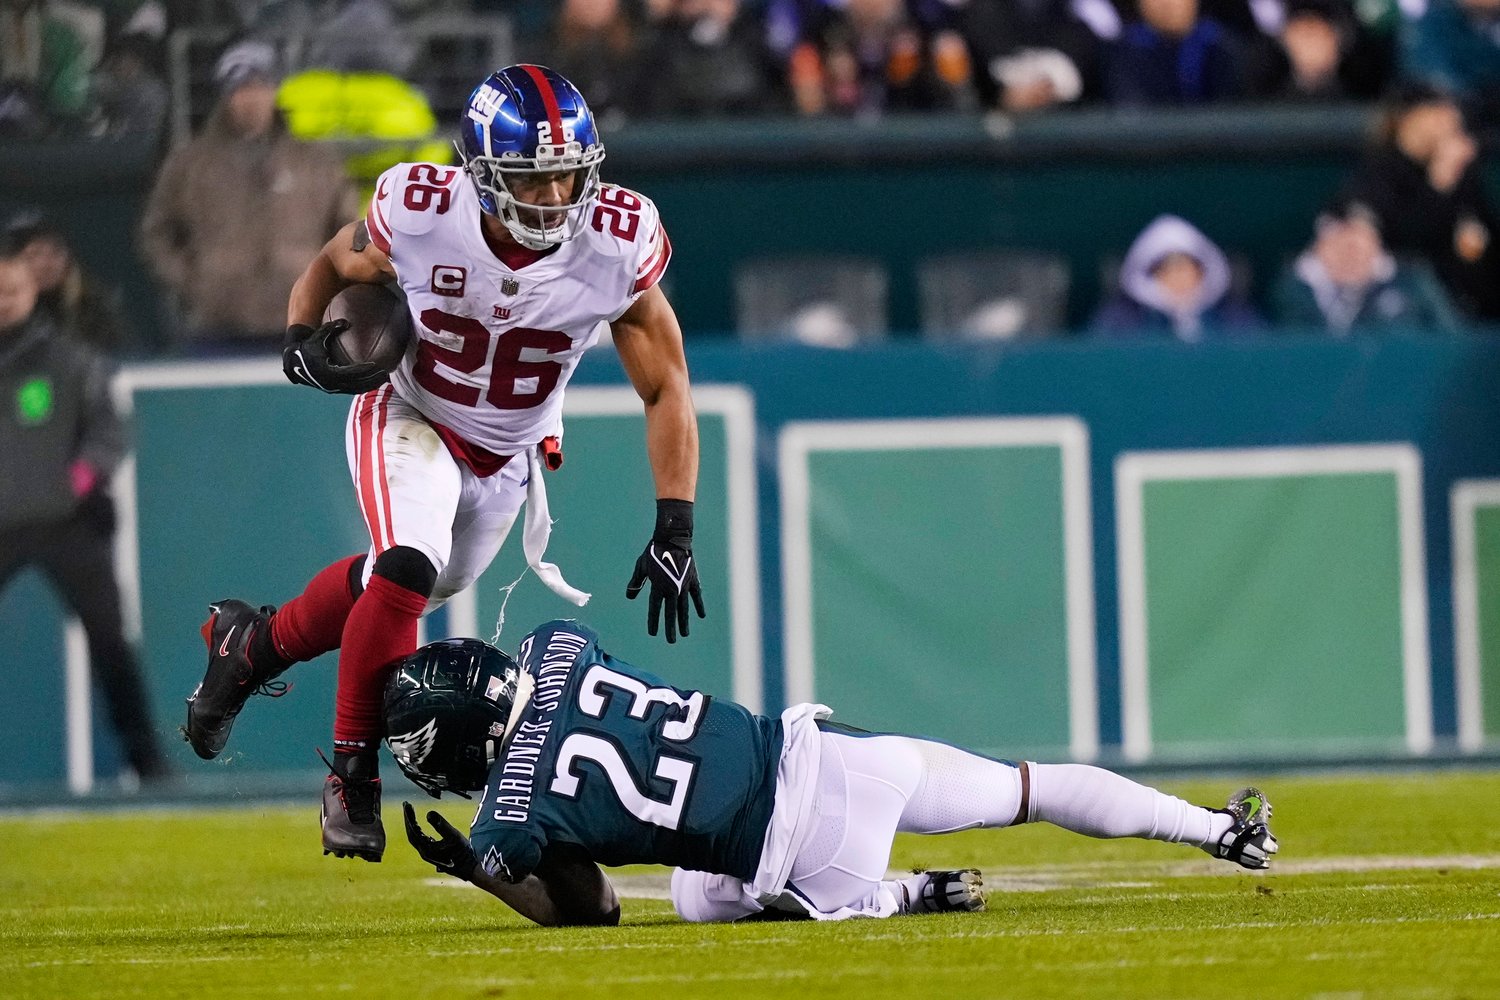 New York Giants running back Saquon Barkley (26) runs with the ball as Philadelphia Eagles safety C.J. Gardner-Johnson (23) tries to stop him during the second half of a divisional round playoff game on Saturday night in Philadelphia.